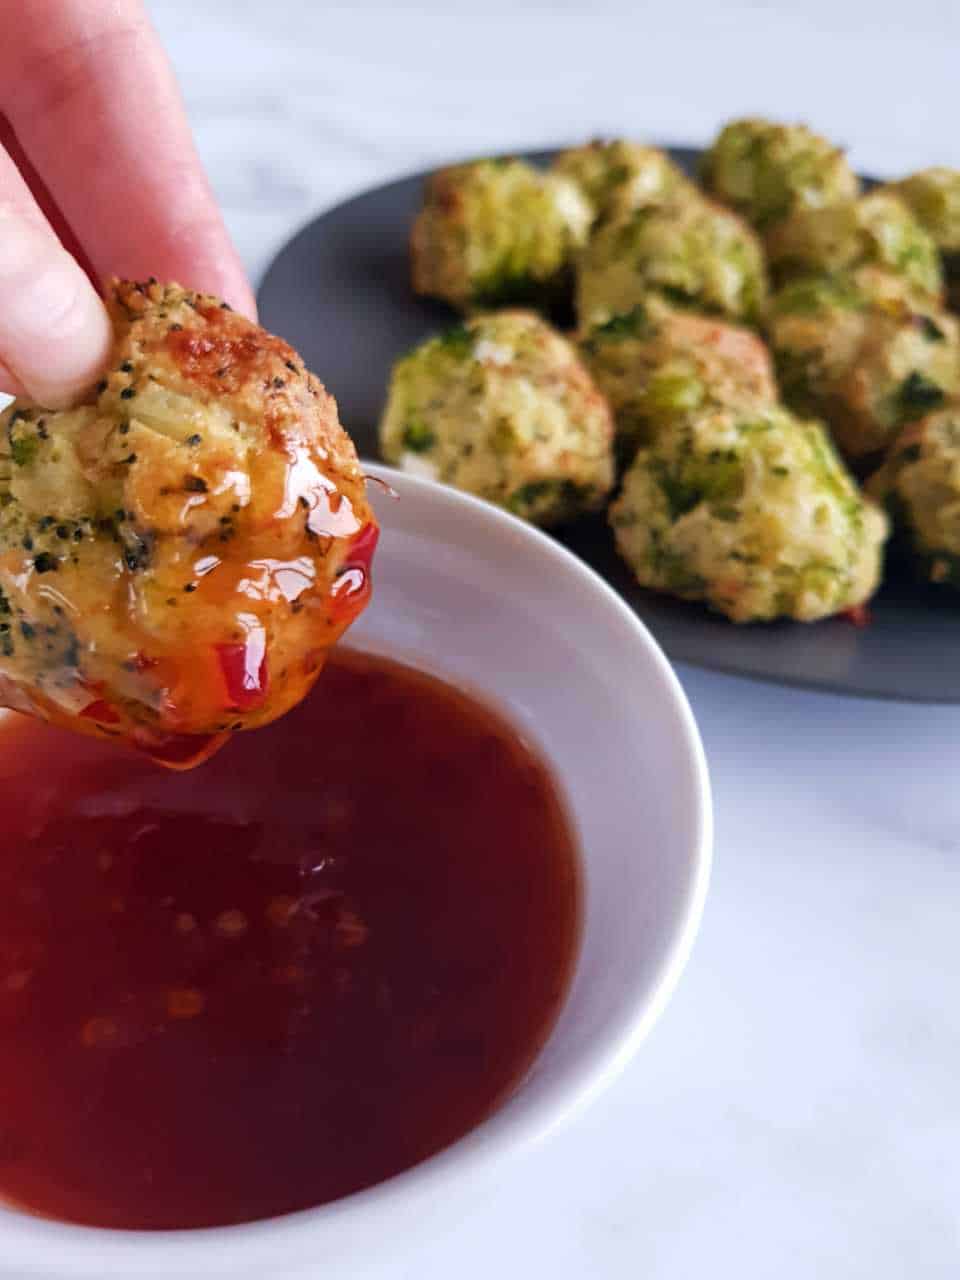 Broccoli and cheese ball dipped in a bowl of red sauce. Plate of broccoli and cheese balls in the background.